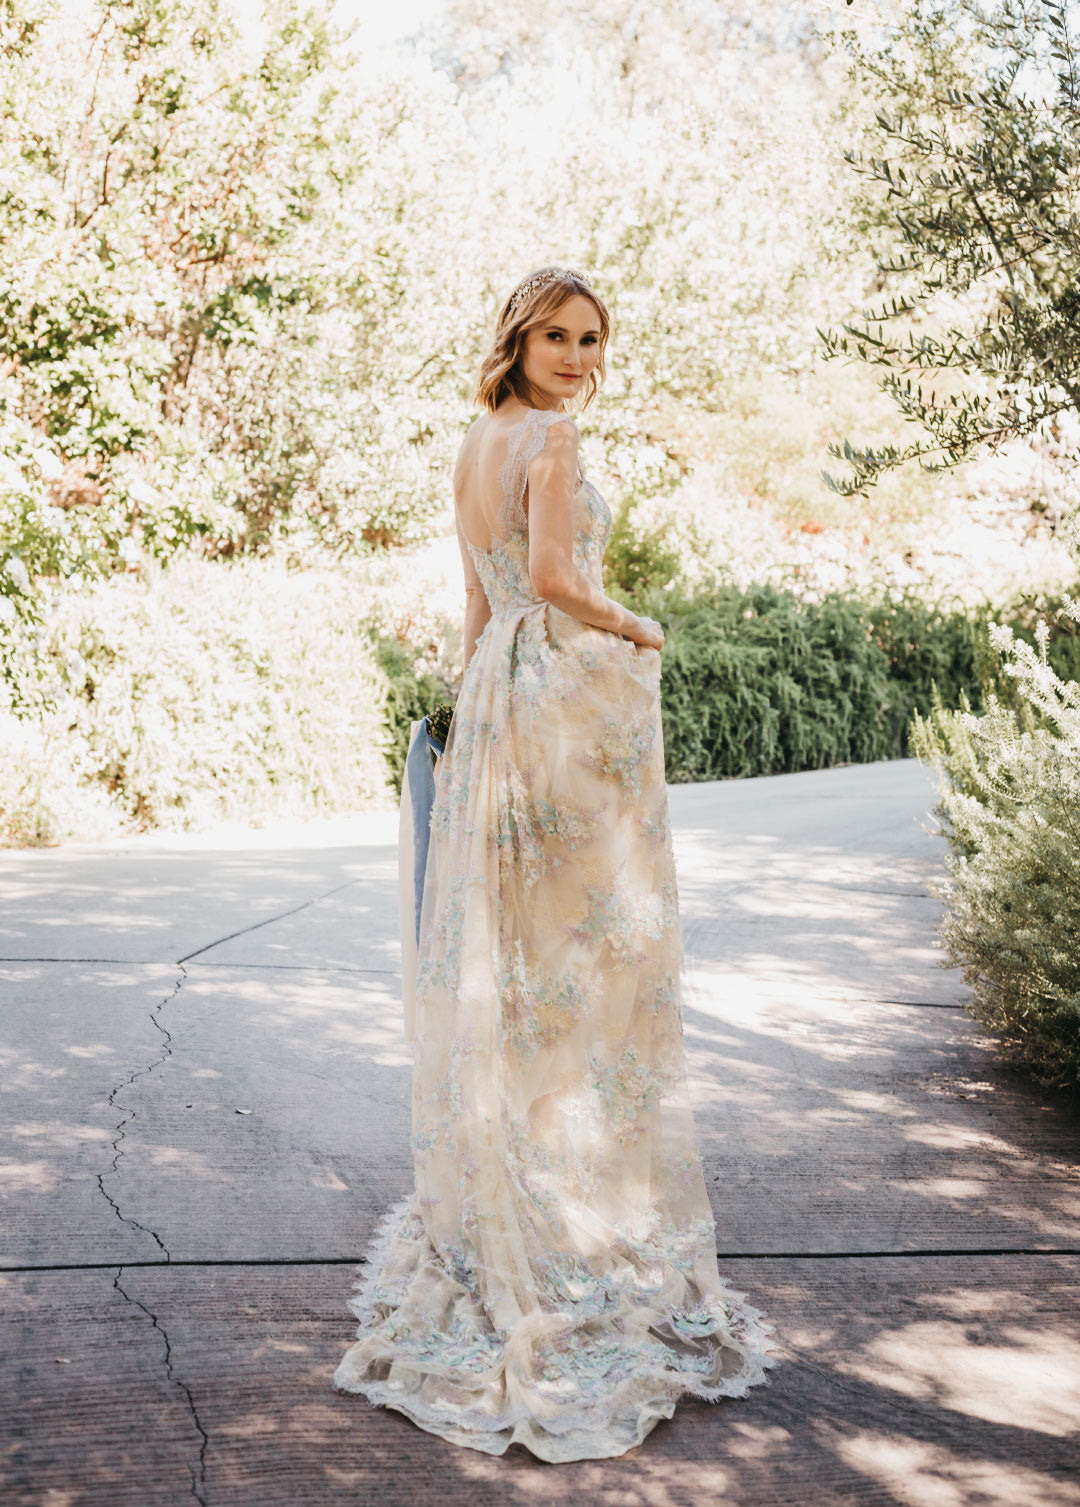 Bride in Ophelia colorful wedding dress by Claire Pettibone